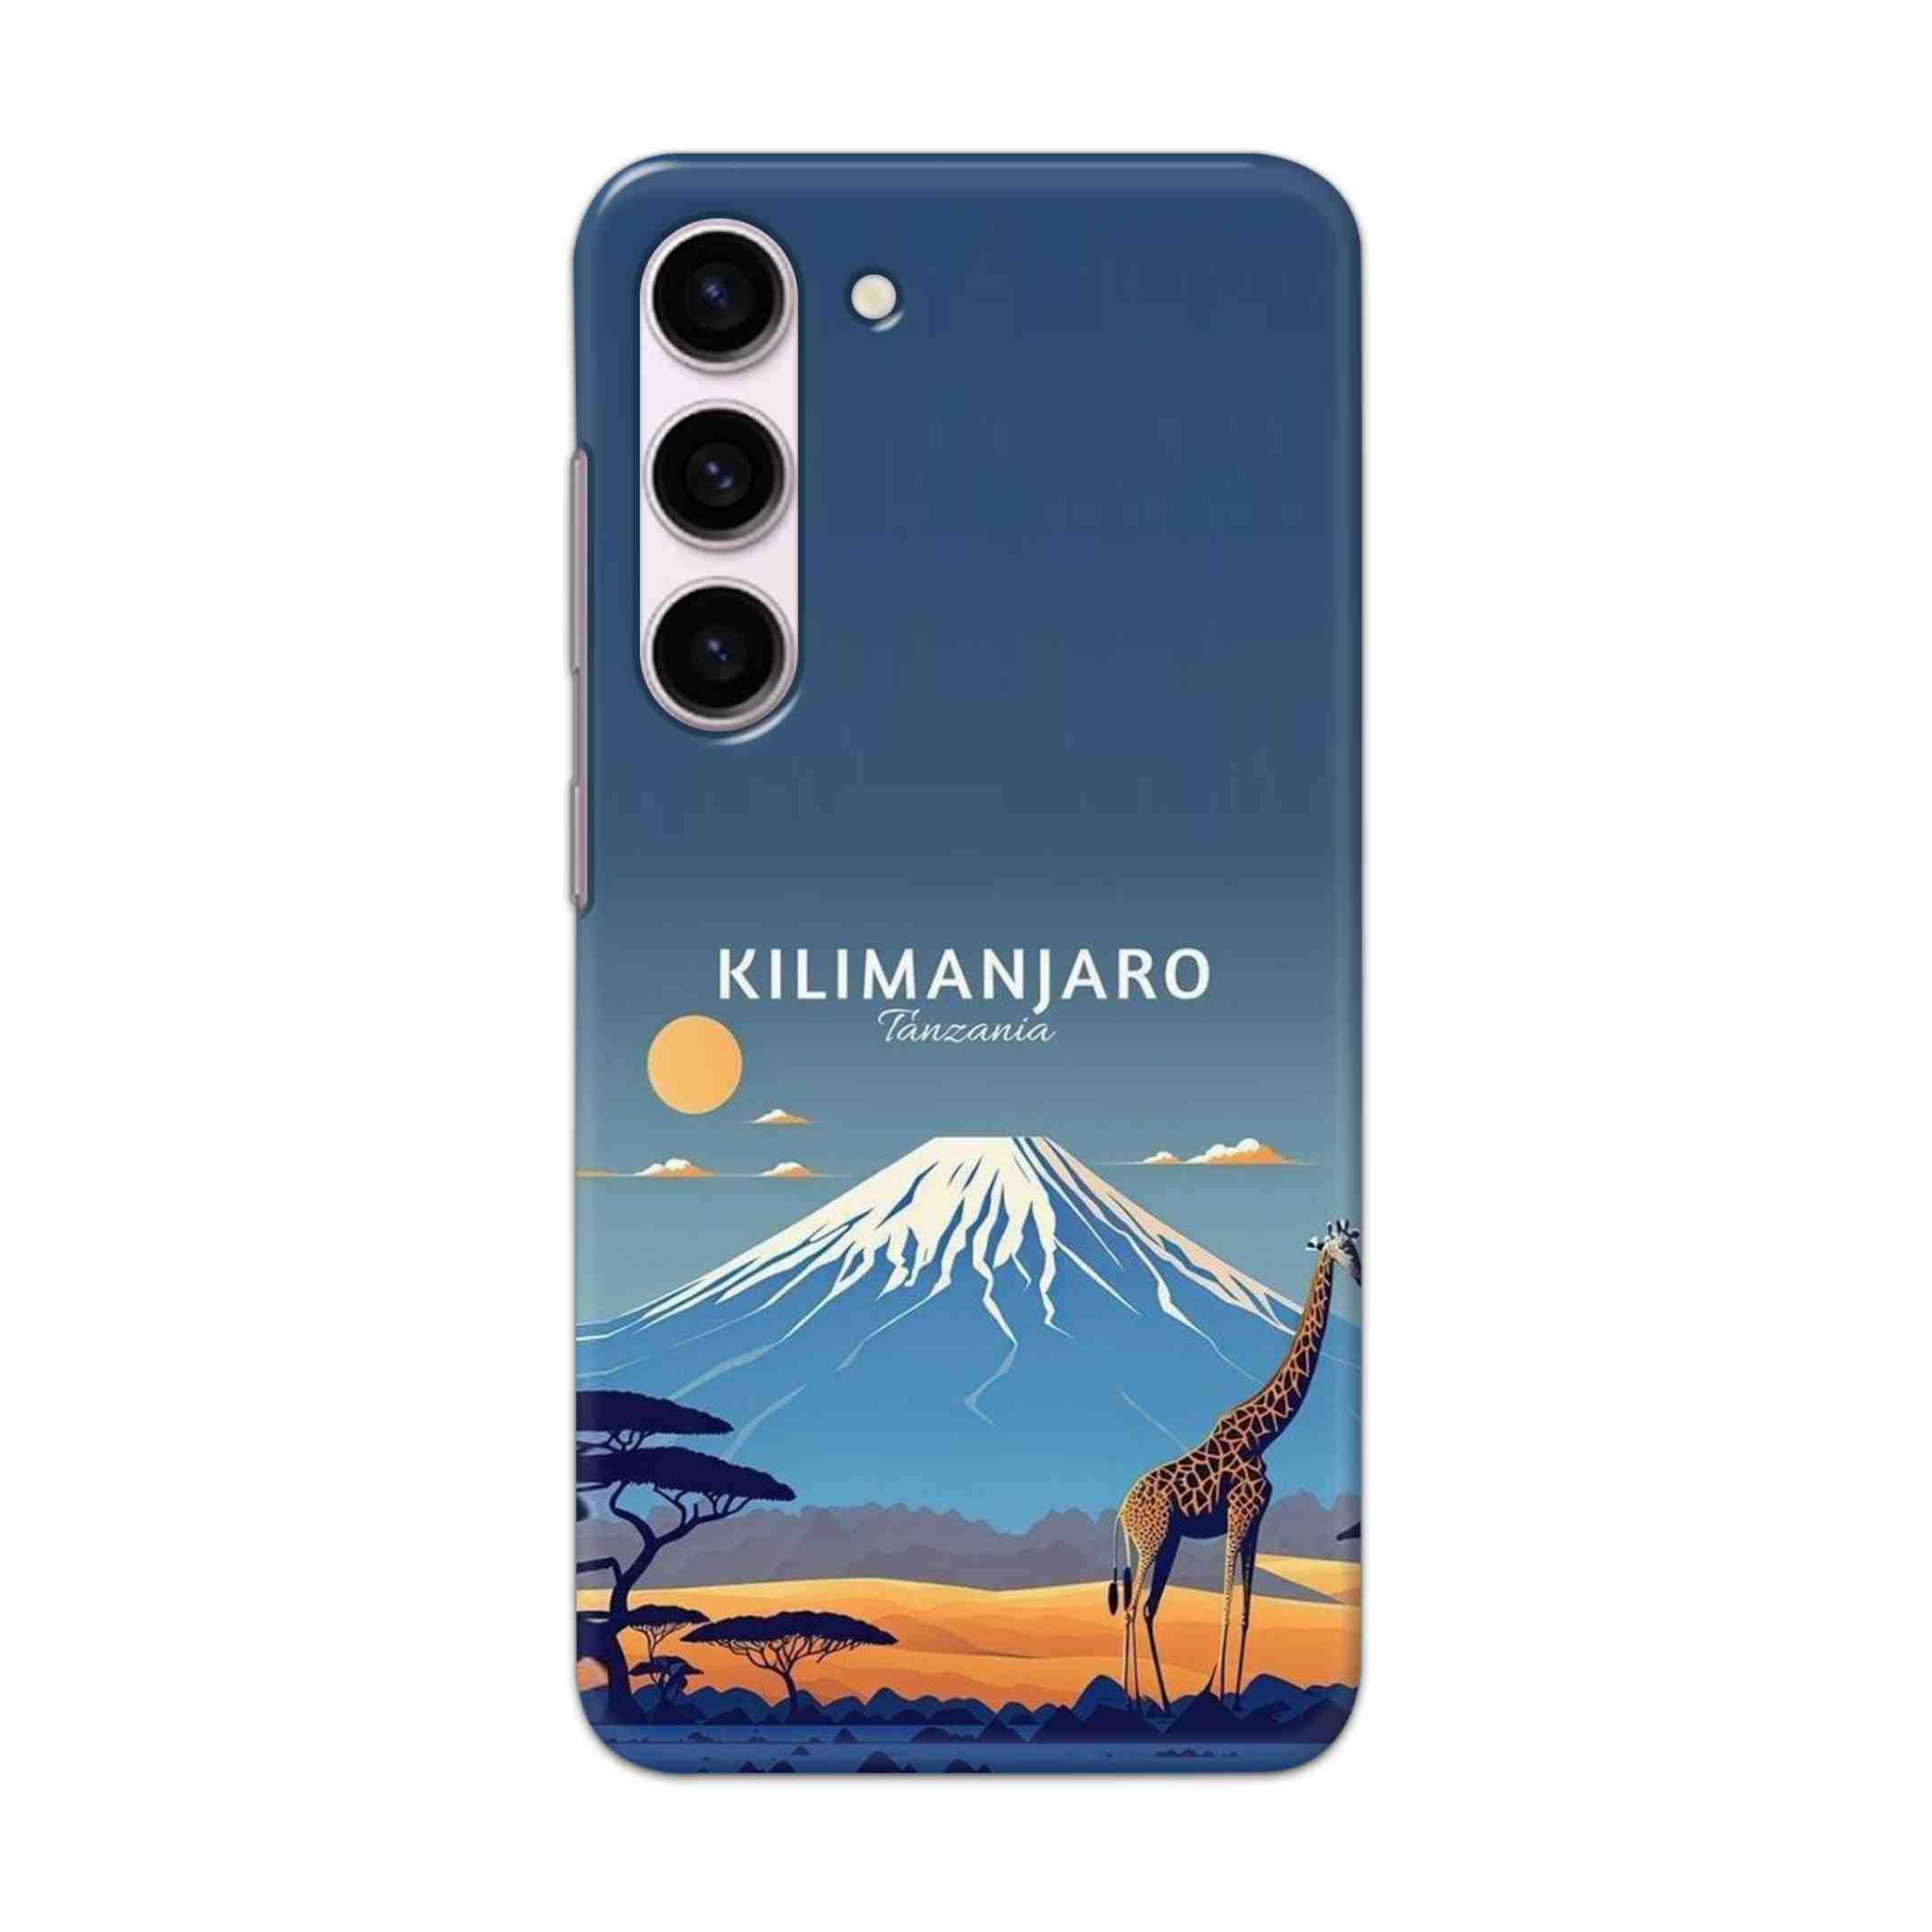 Buy Kilimanjaro Hard Back Mobile Phone Case Cover For Samsung Galaxy S23 Online